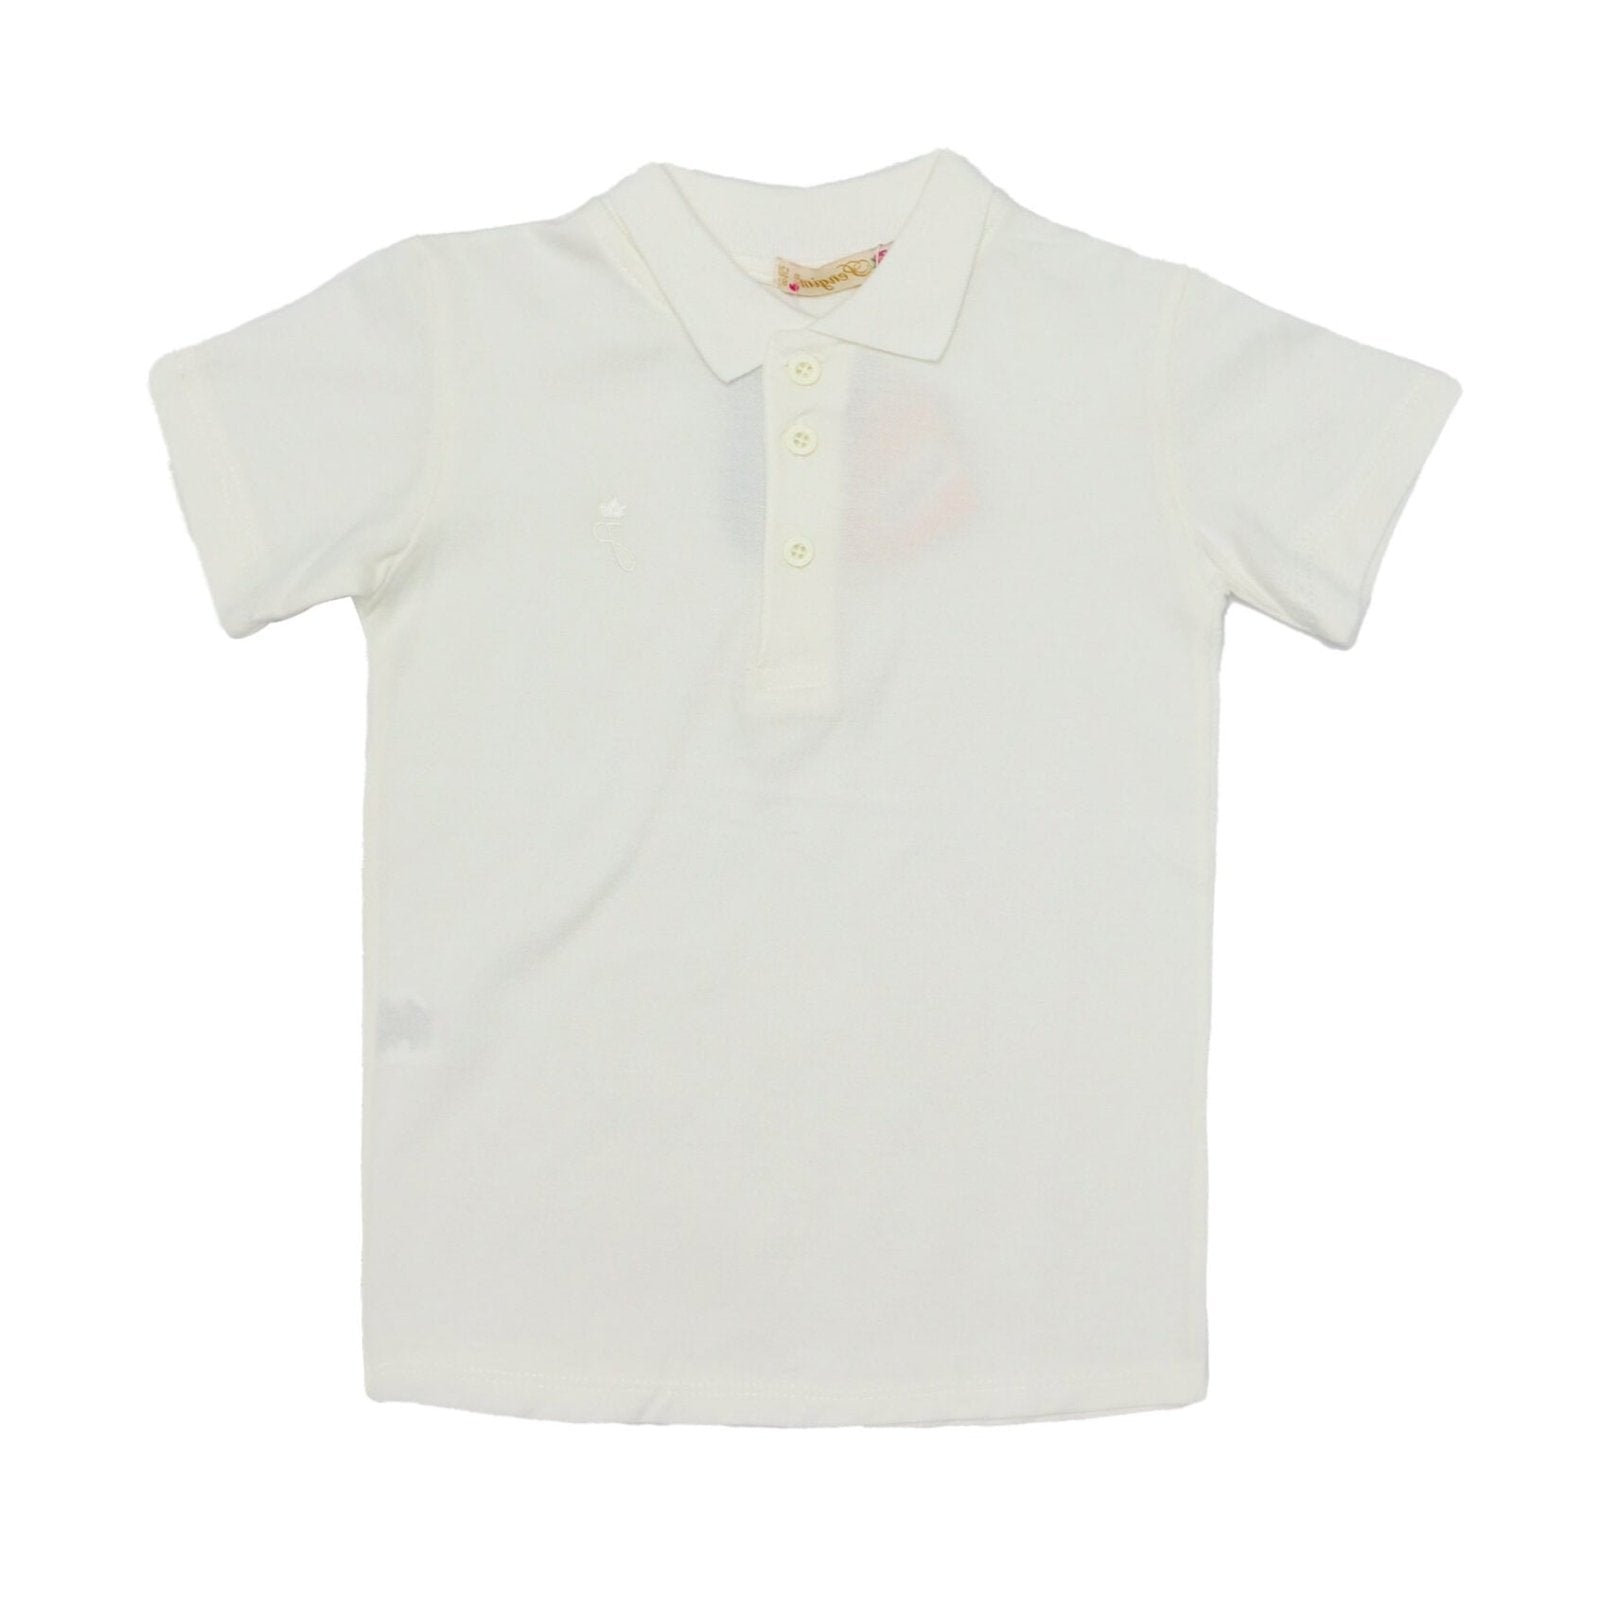 Boys T-Shirt White Color by Made in Turkey